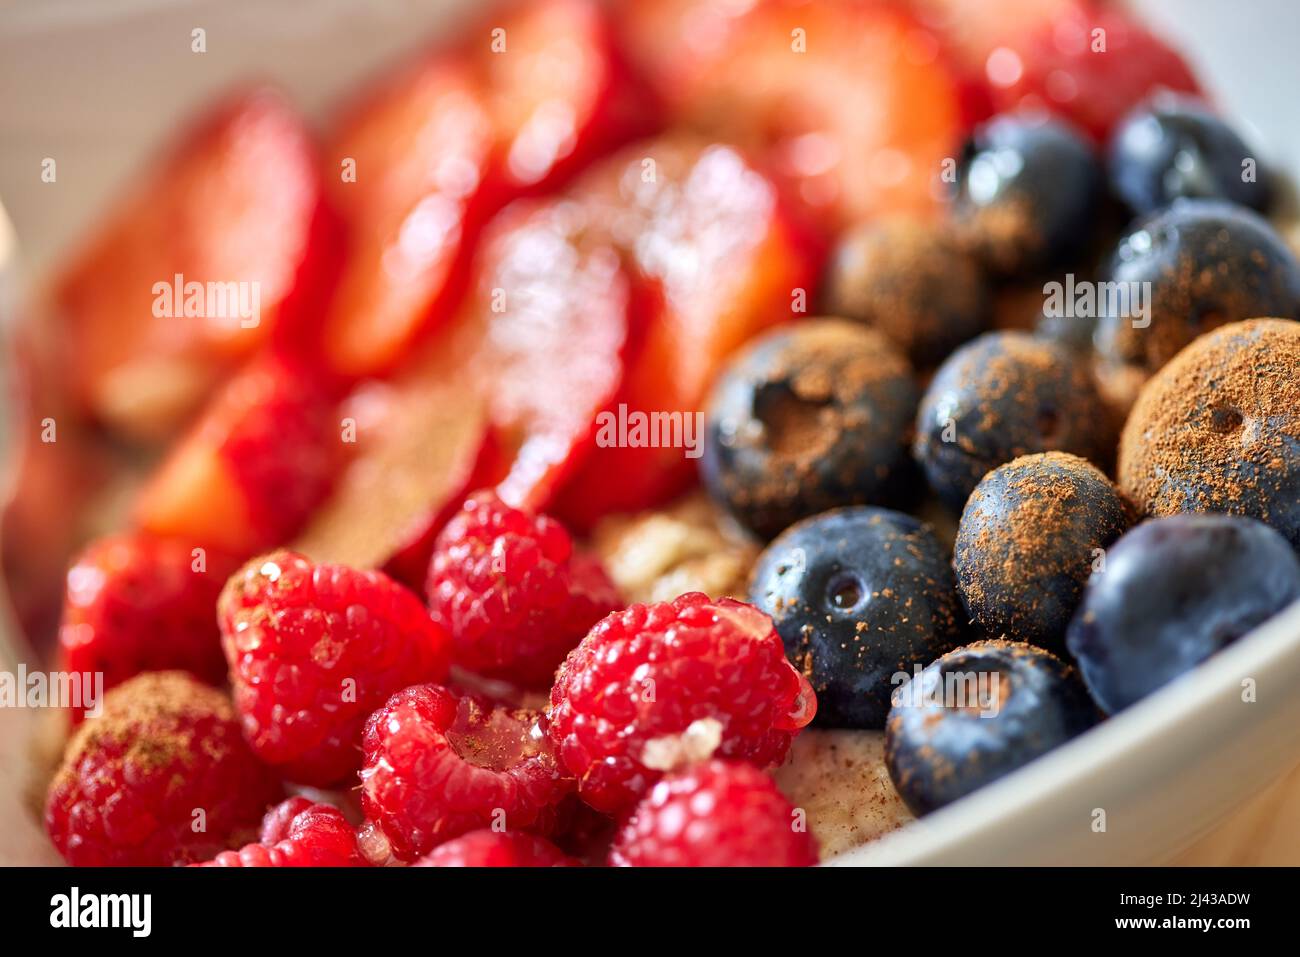 Oatmeal porridge with fruits and cinnamon - close up view Stock Photo